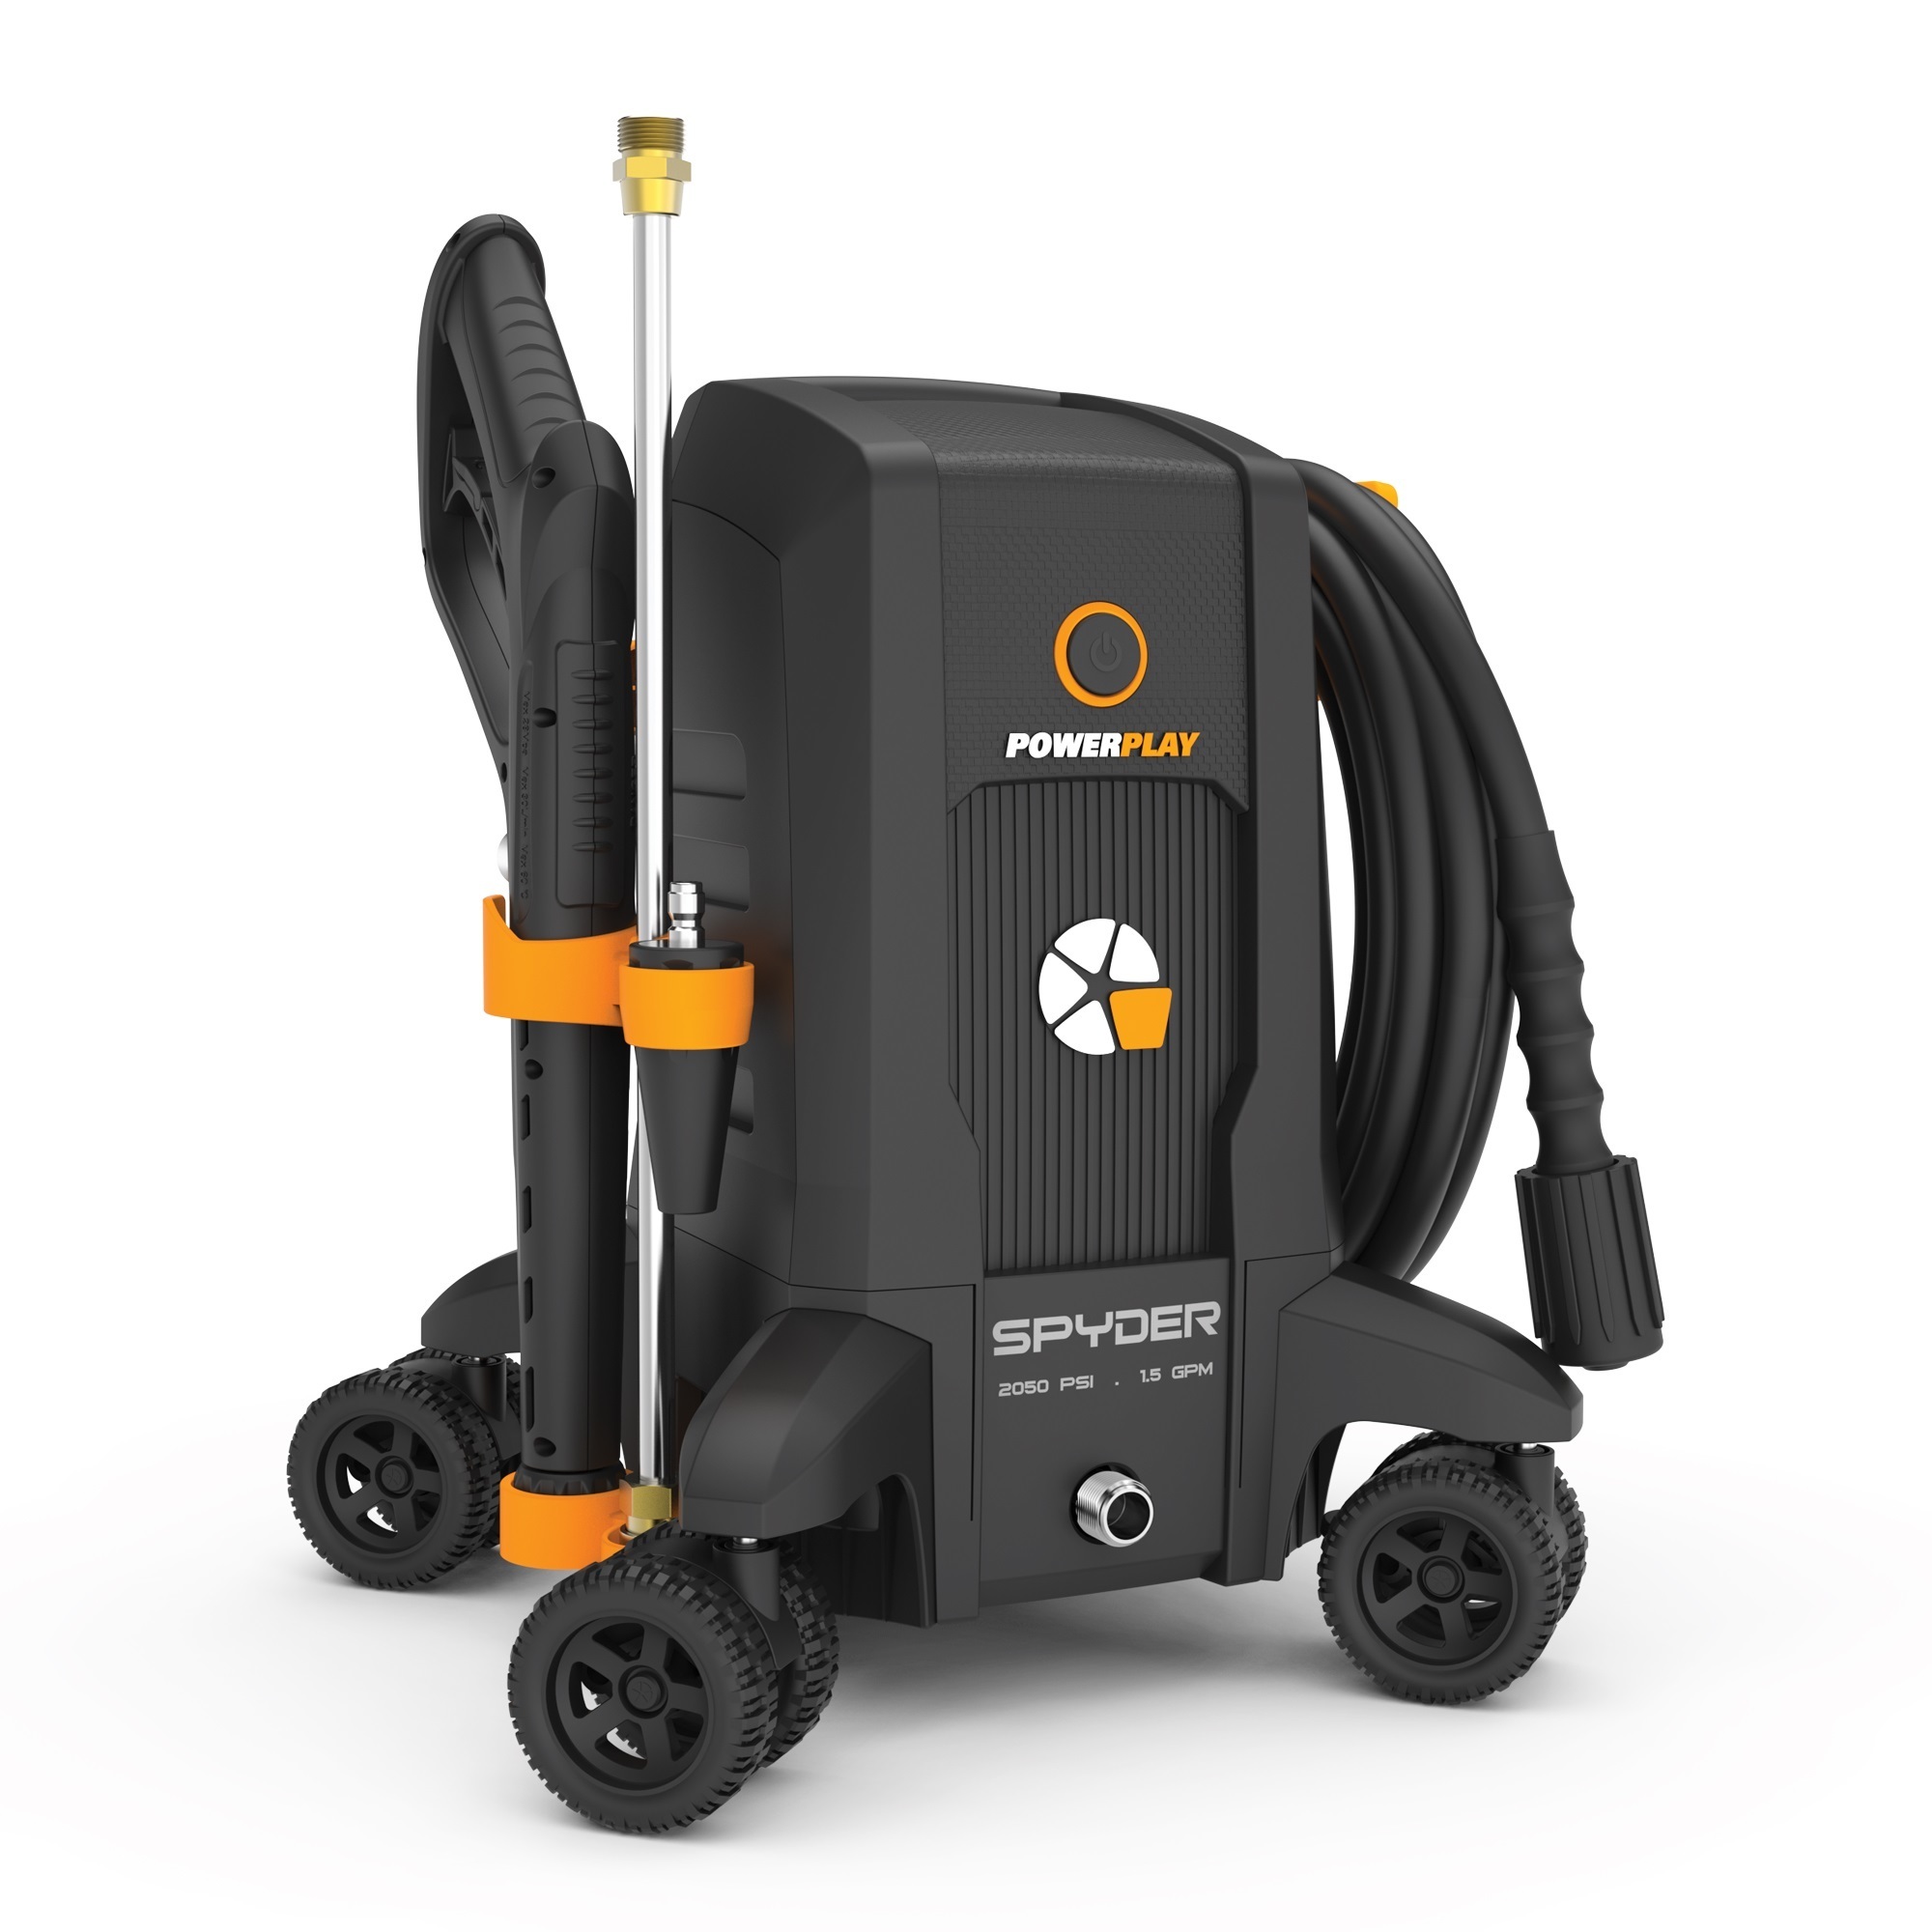 Powerplay, SPYDER Pulse 2050PSI Electric Pressure Washer, Pressure 2050 PSI, Flow 1.5 GPM, Volts 120 Model SPY2050X